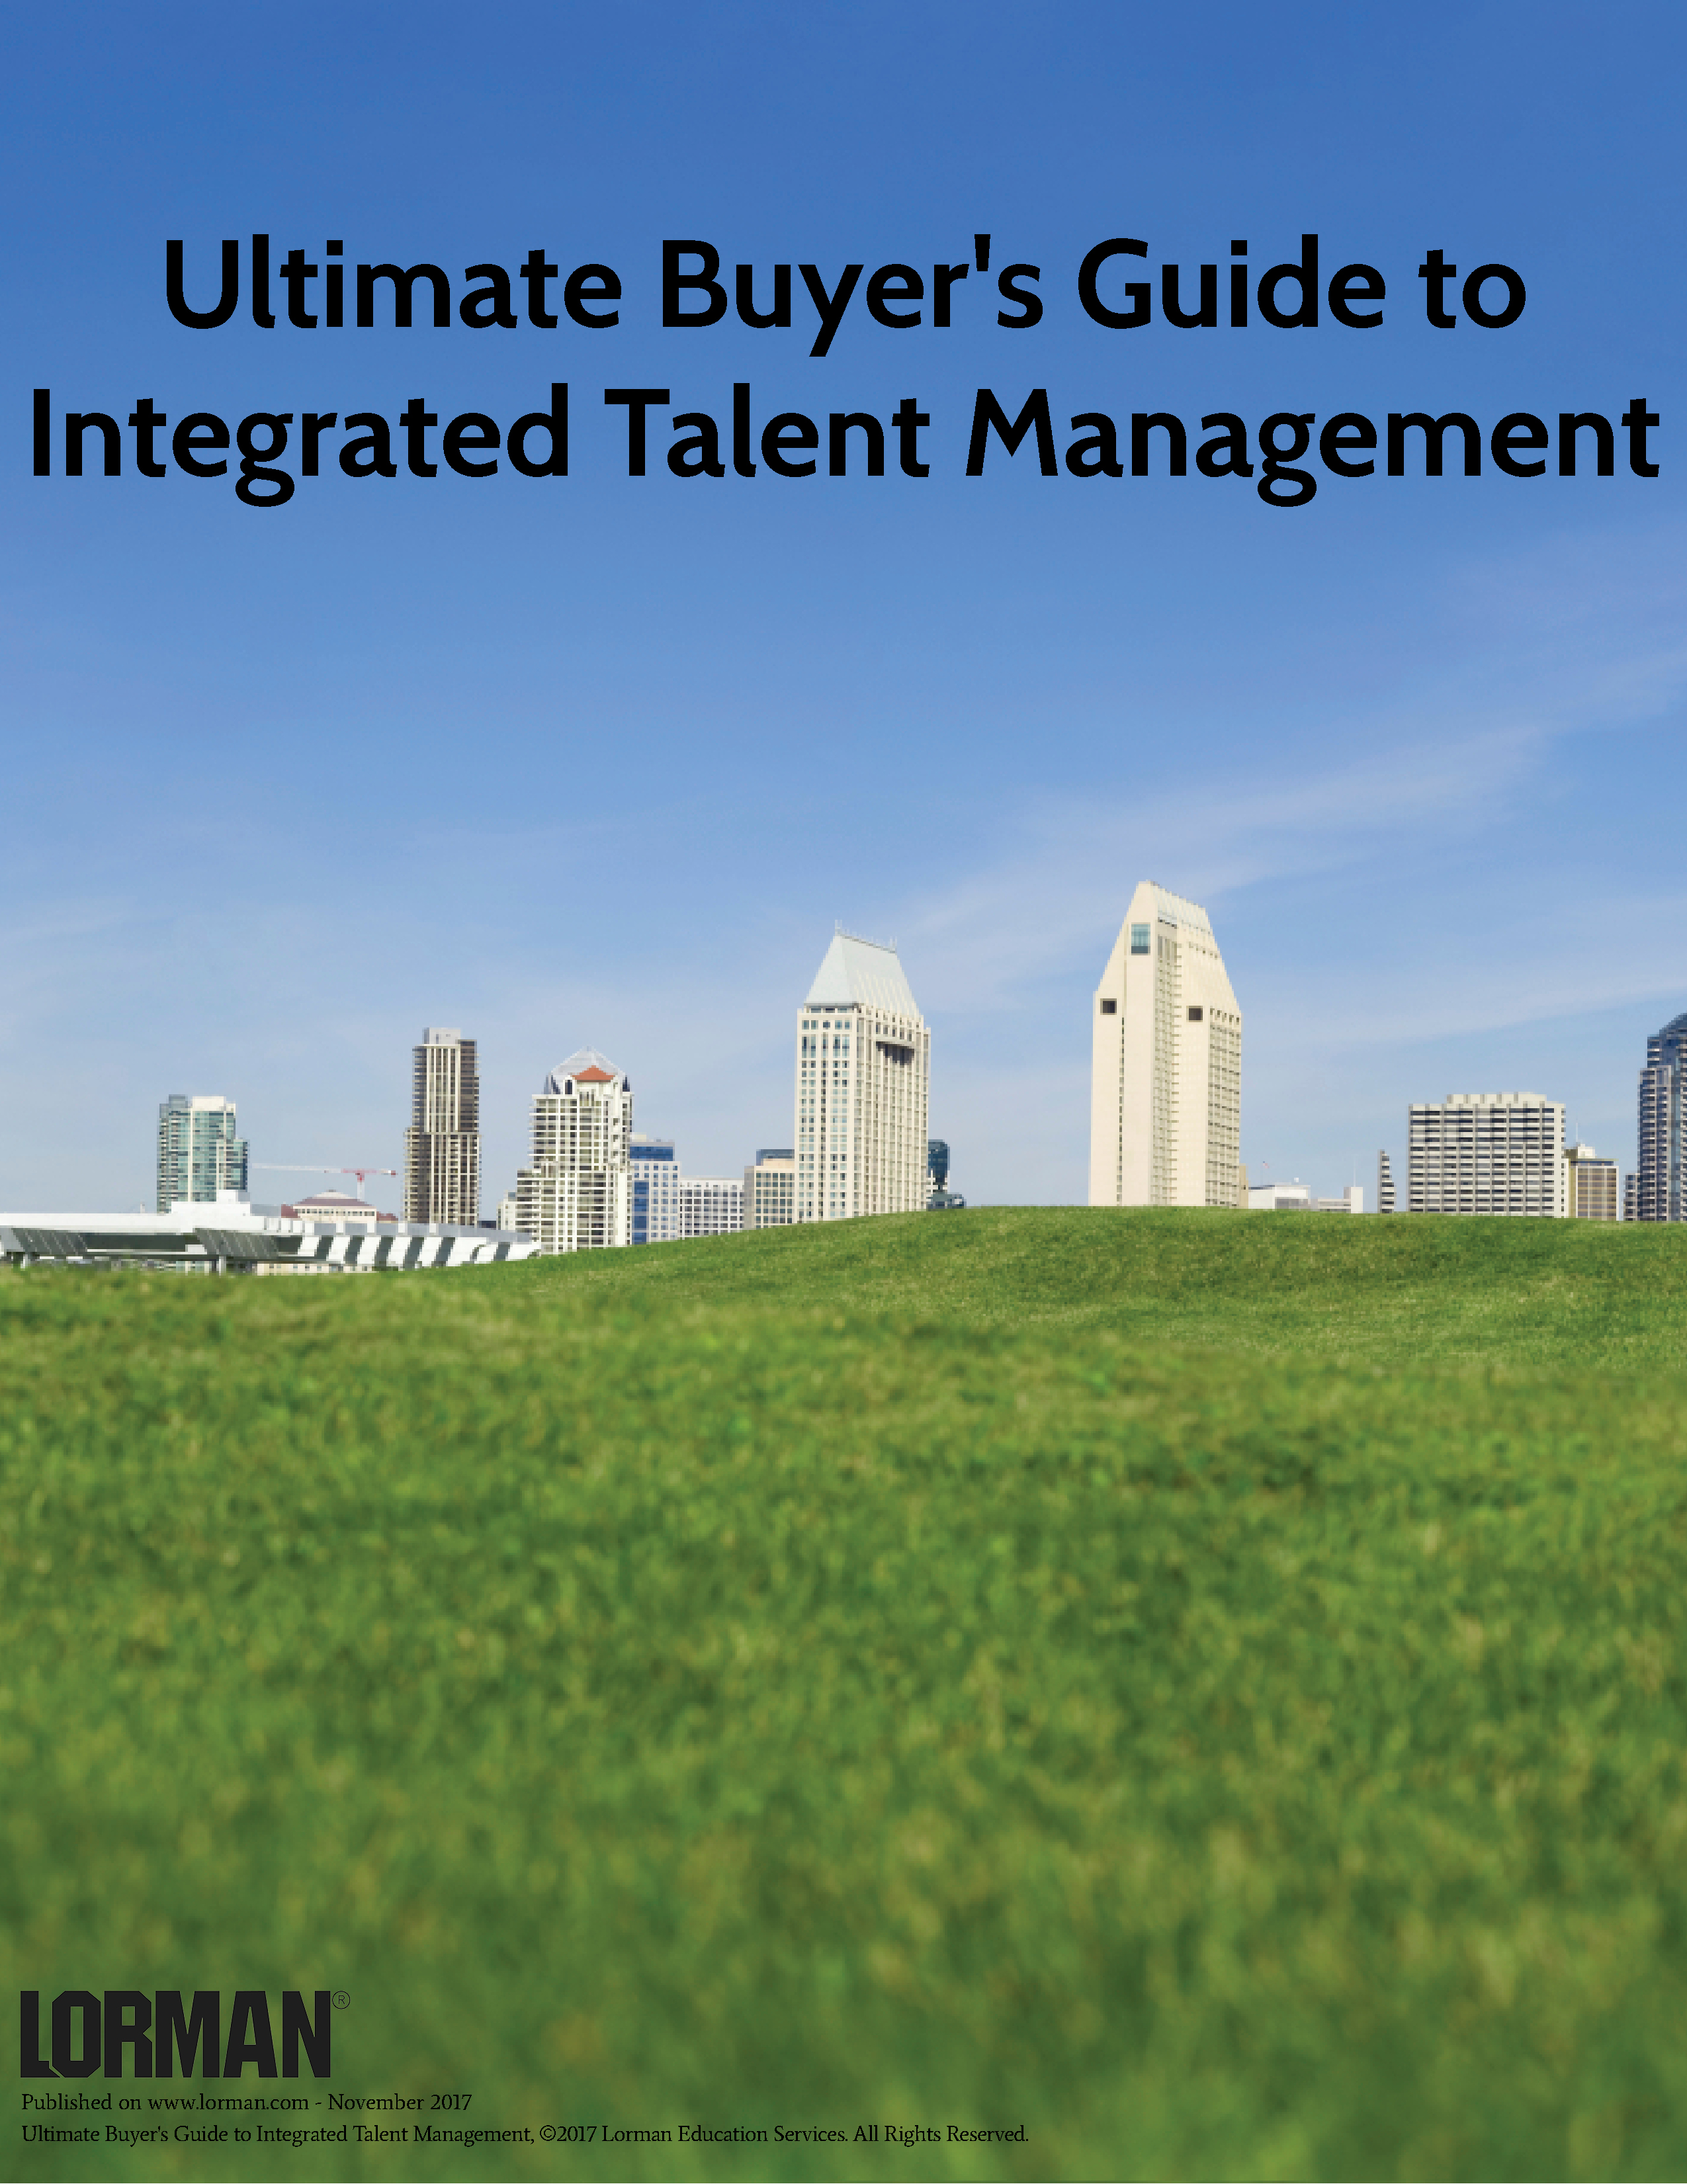 Ultimate Buyer's Guide to Integrated Talent Management